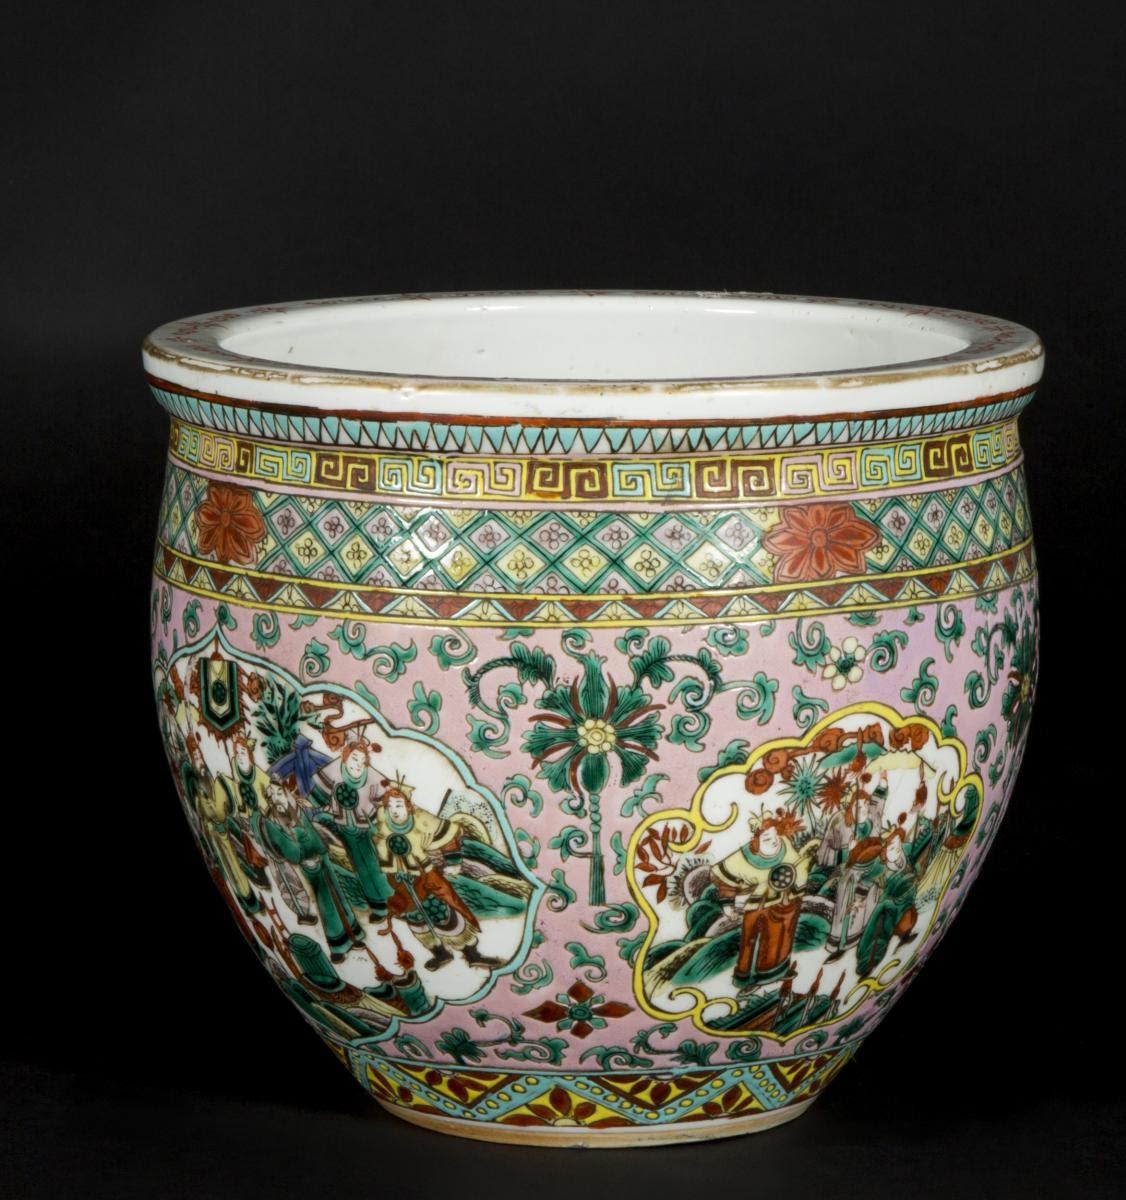 Chinese Canton Porcelain Cache Pot, 20th century.